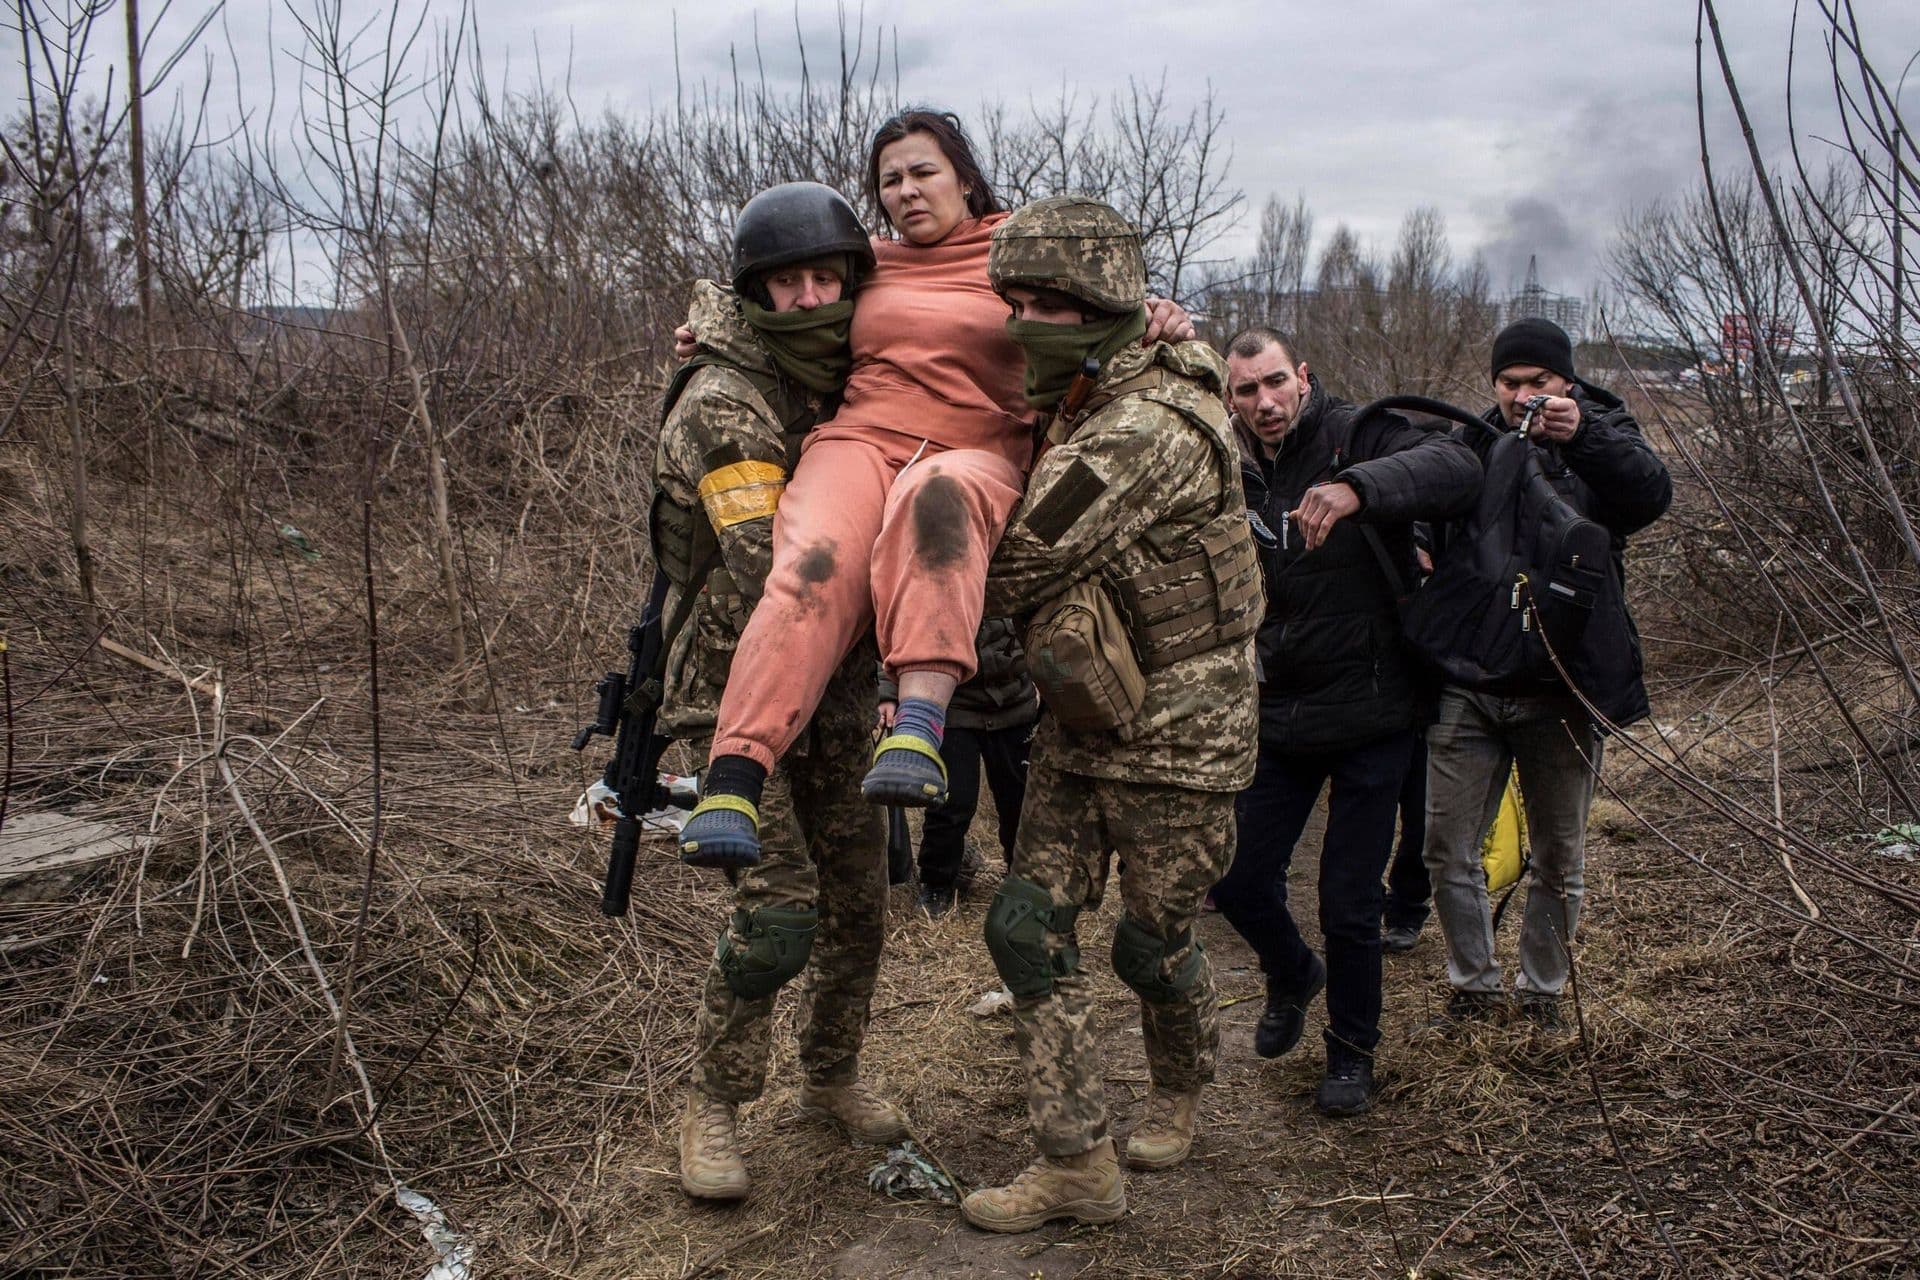 A woman is carried by Ukrainian soldiers while fleeing the town of Irpin